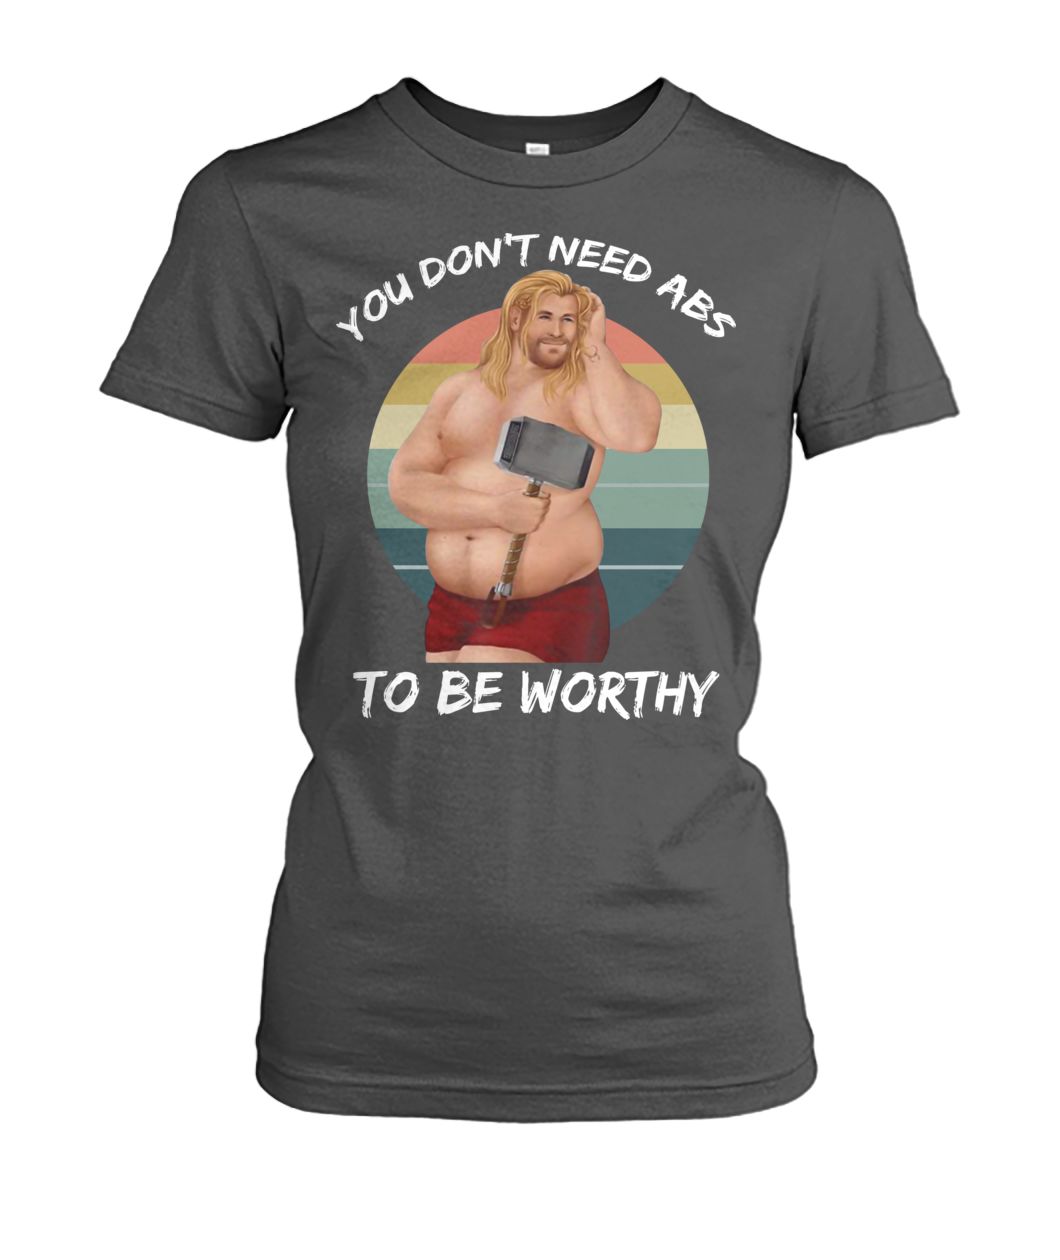 Vintage fat-thor you don't need abs to be worthy women's crew tee